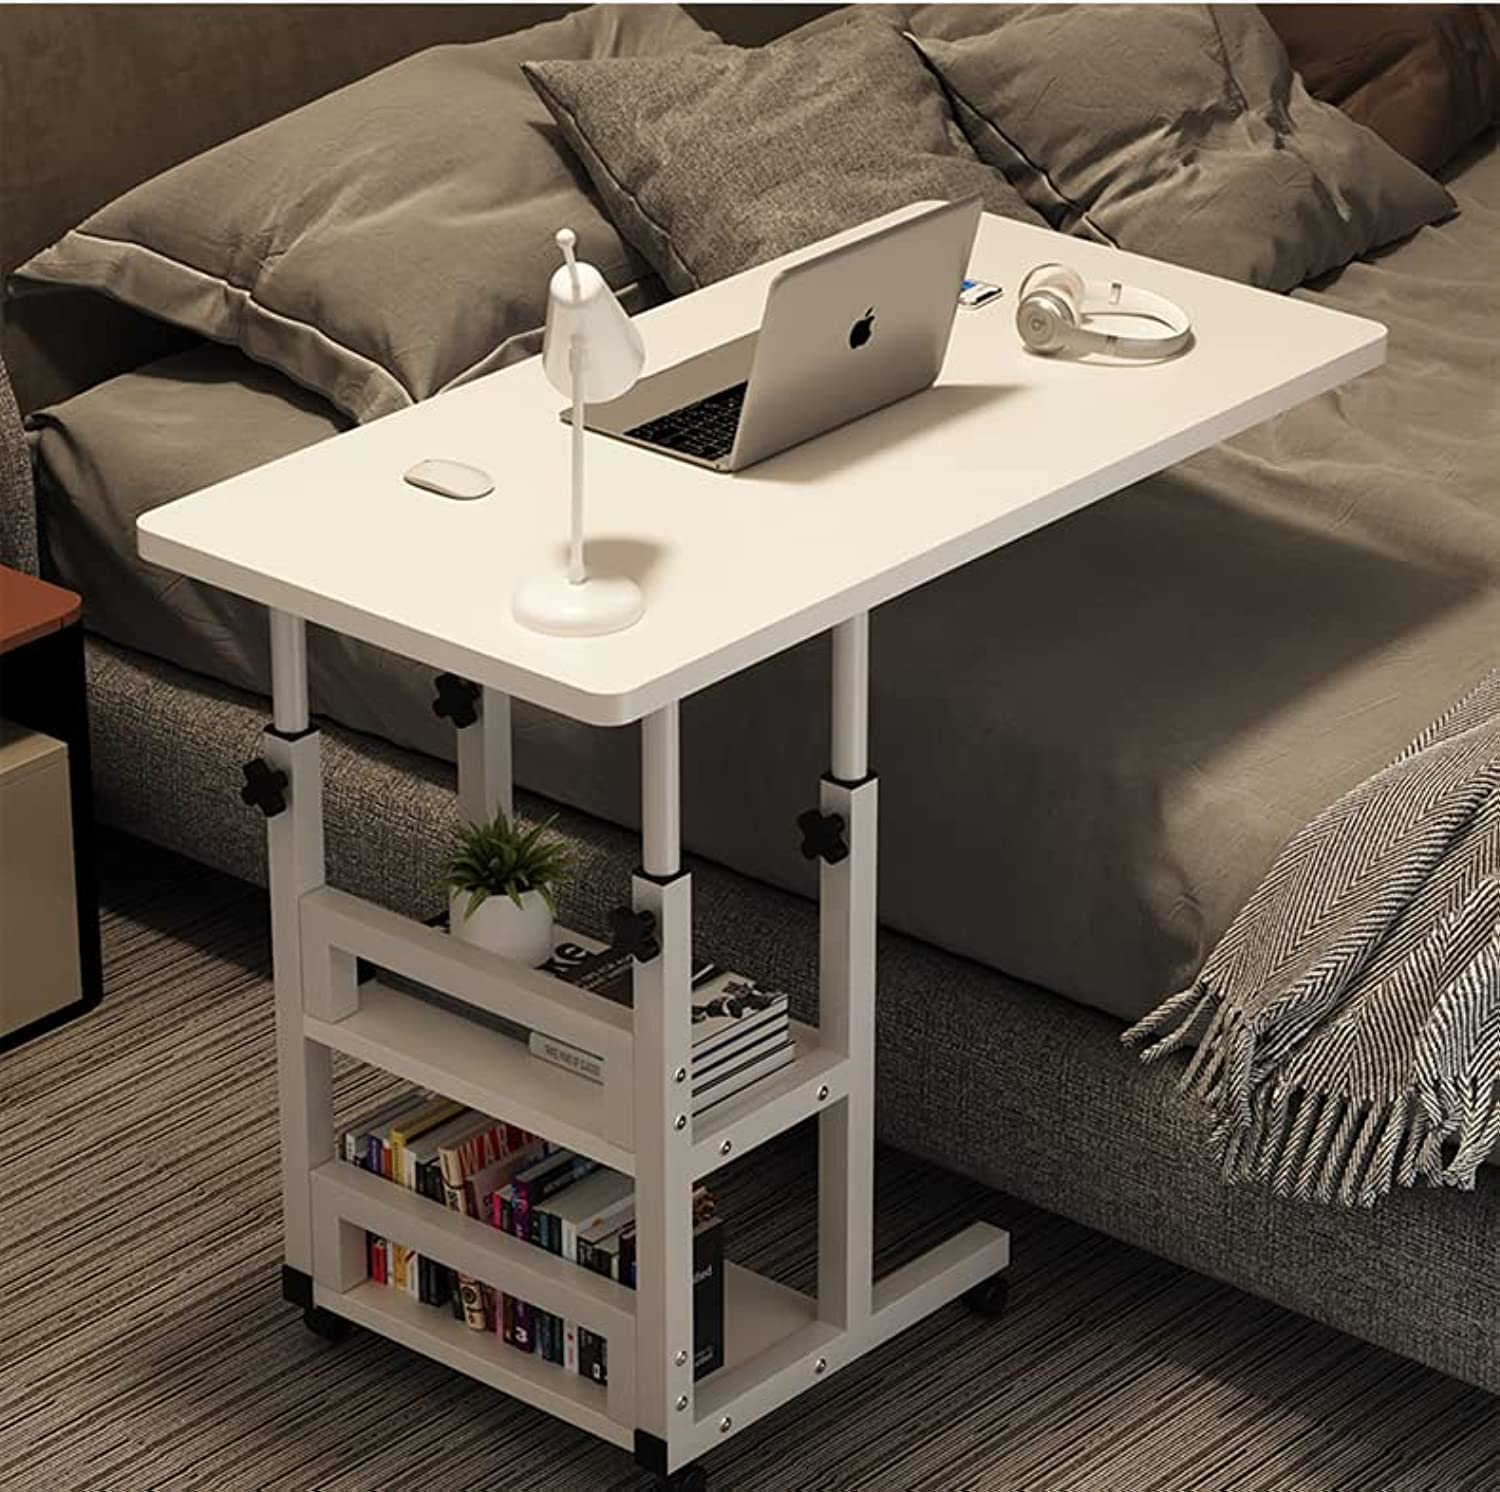 Where can I buy an adjustable laptop table?